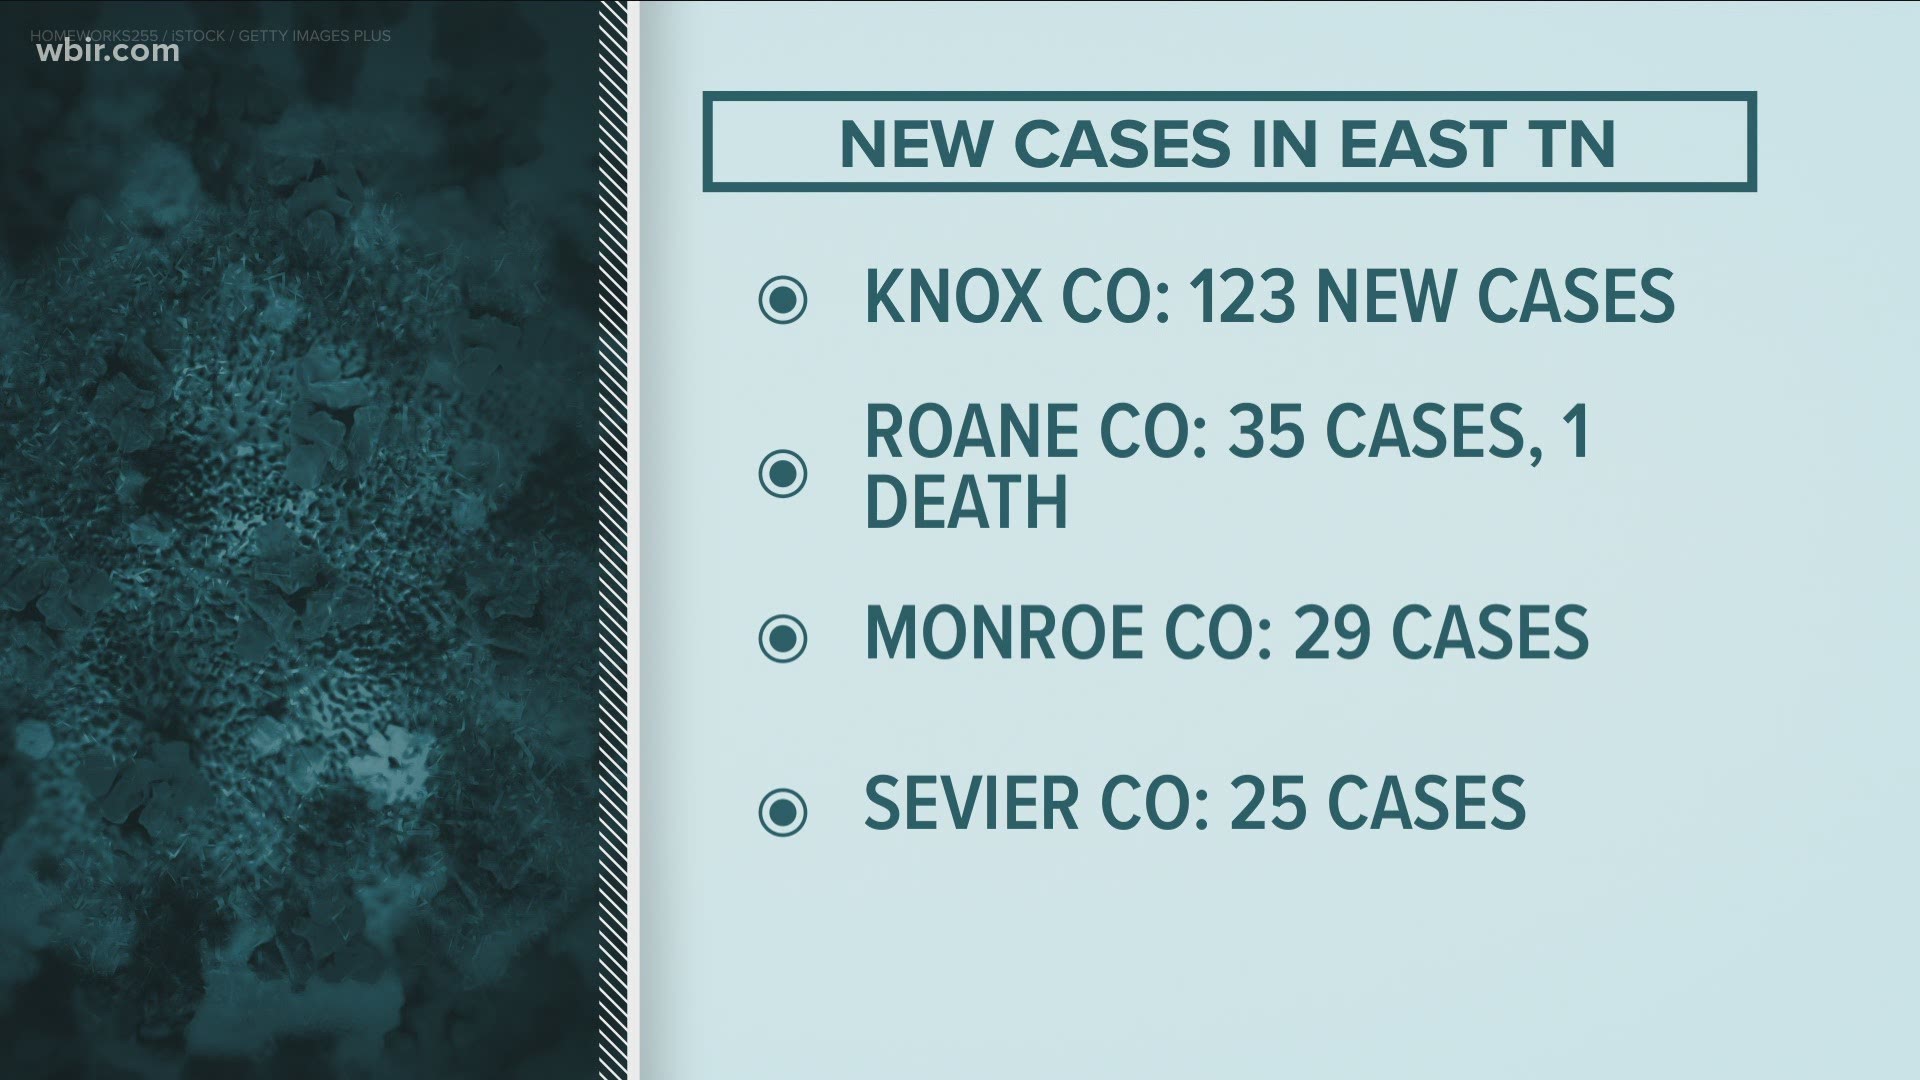 Across the state, officials saw a record number of new virus cases Monday.